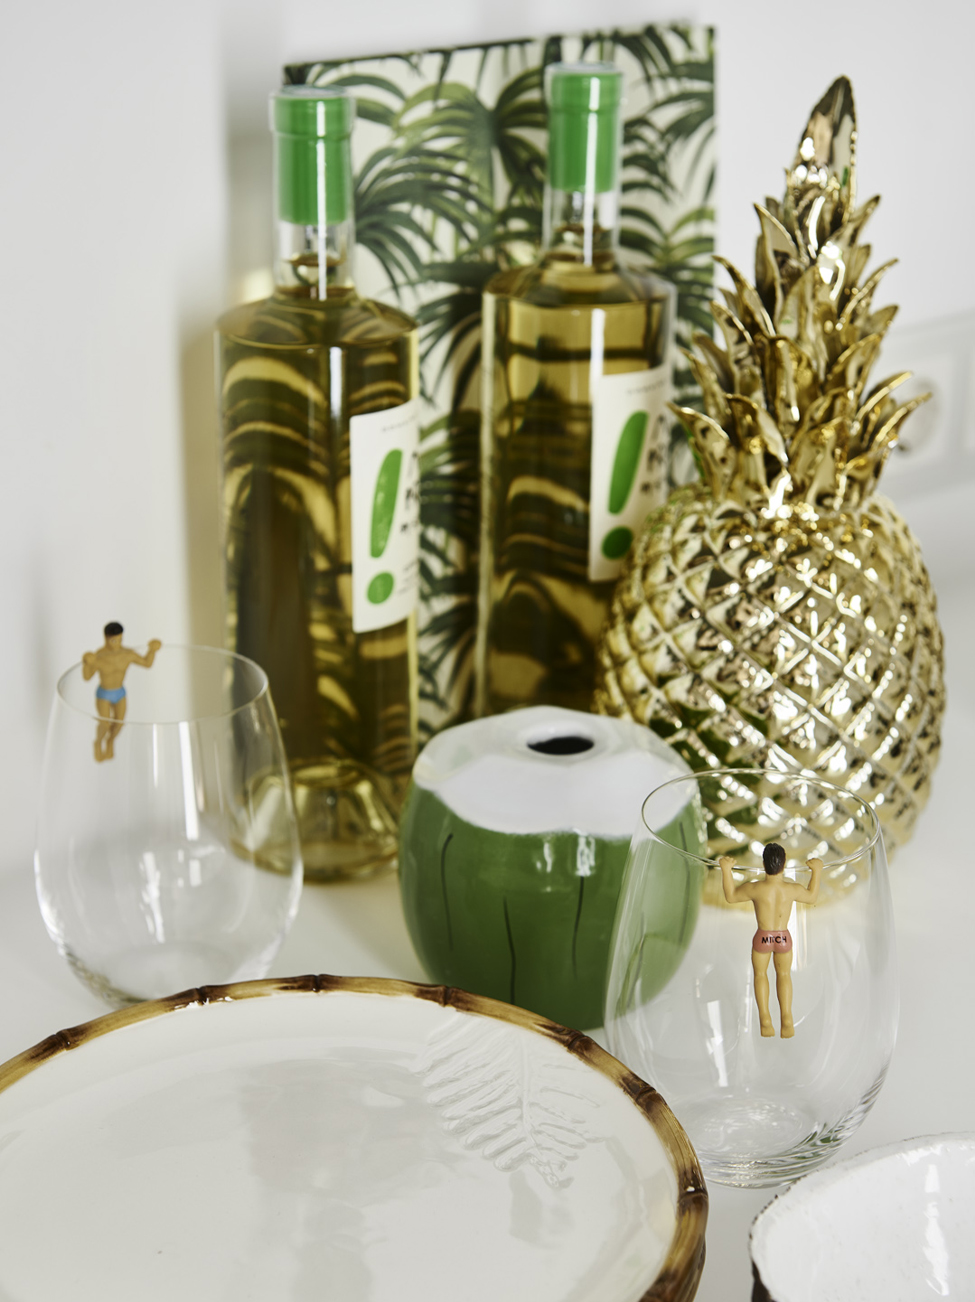 a golden pineapple, a ceramic coconut, bottles glasses and plates